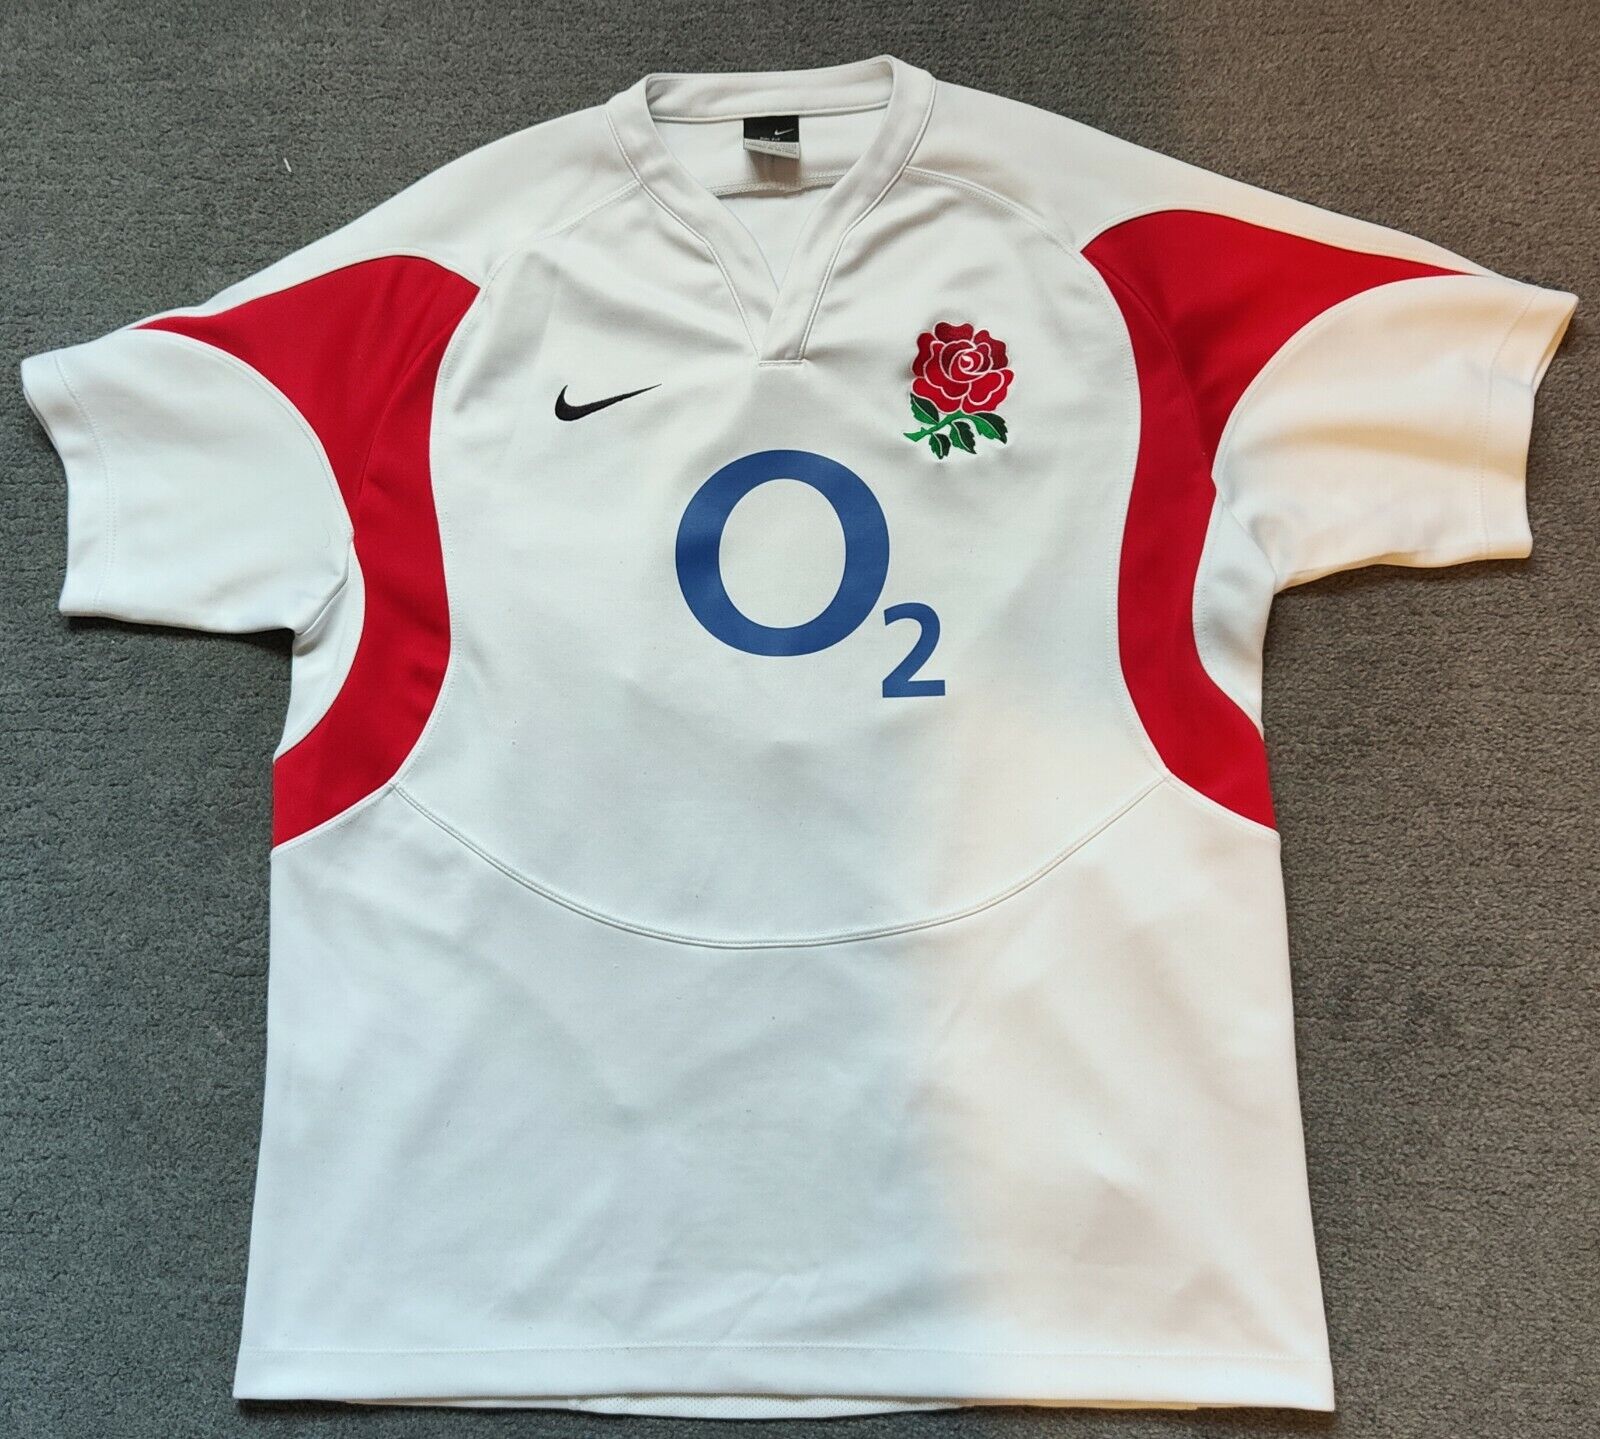 Nike England 2005/2006 Men's Rugby Shirt Size Large